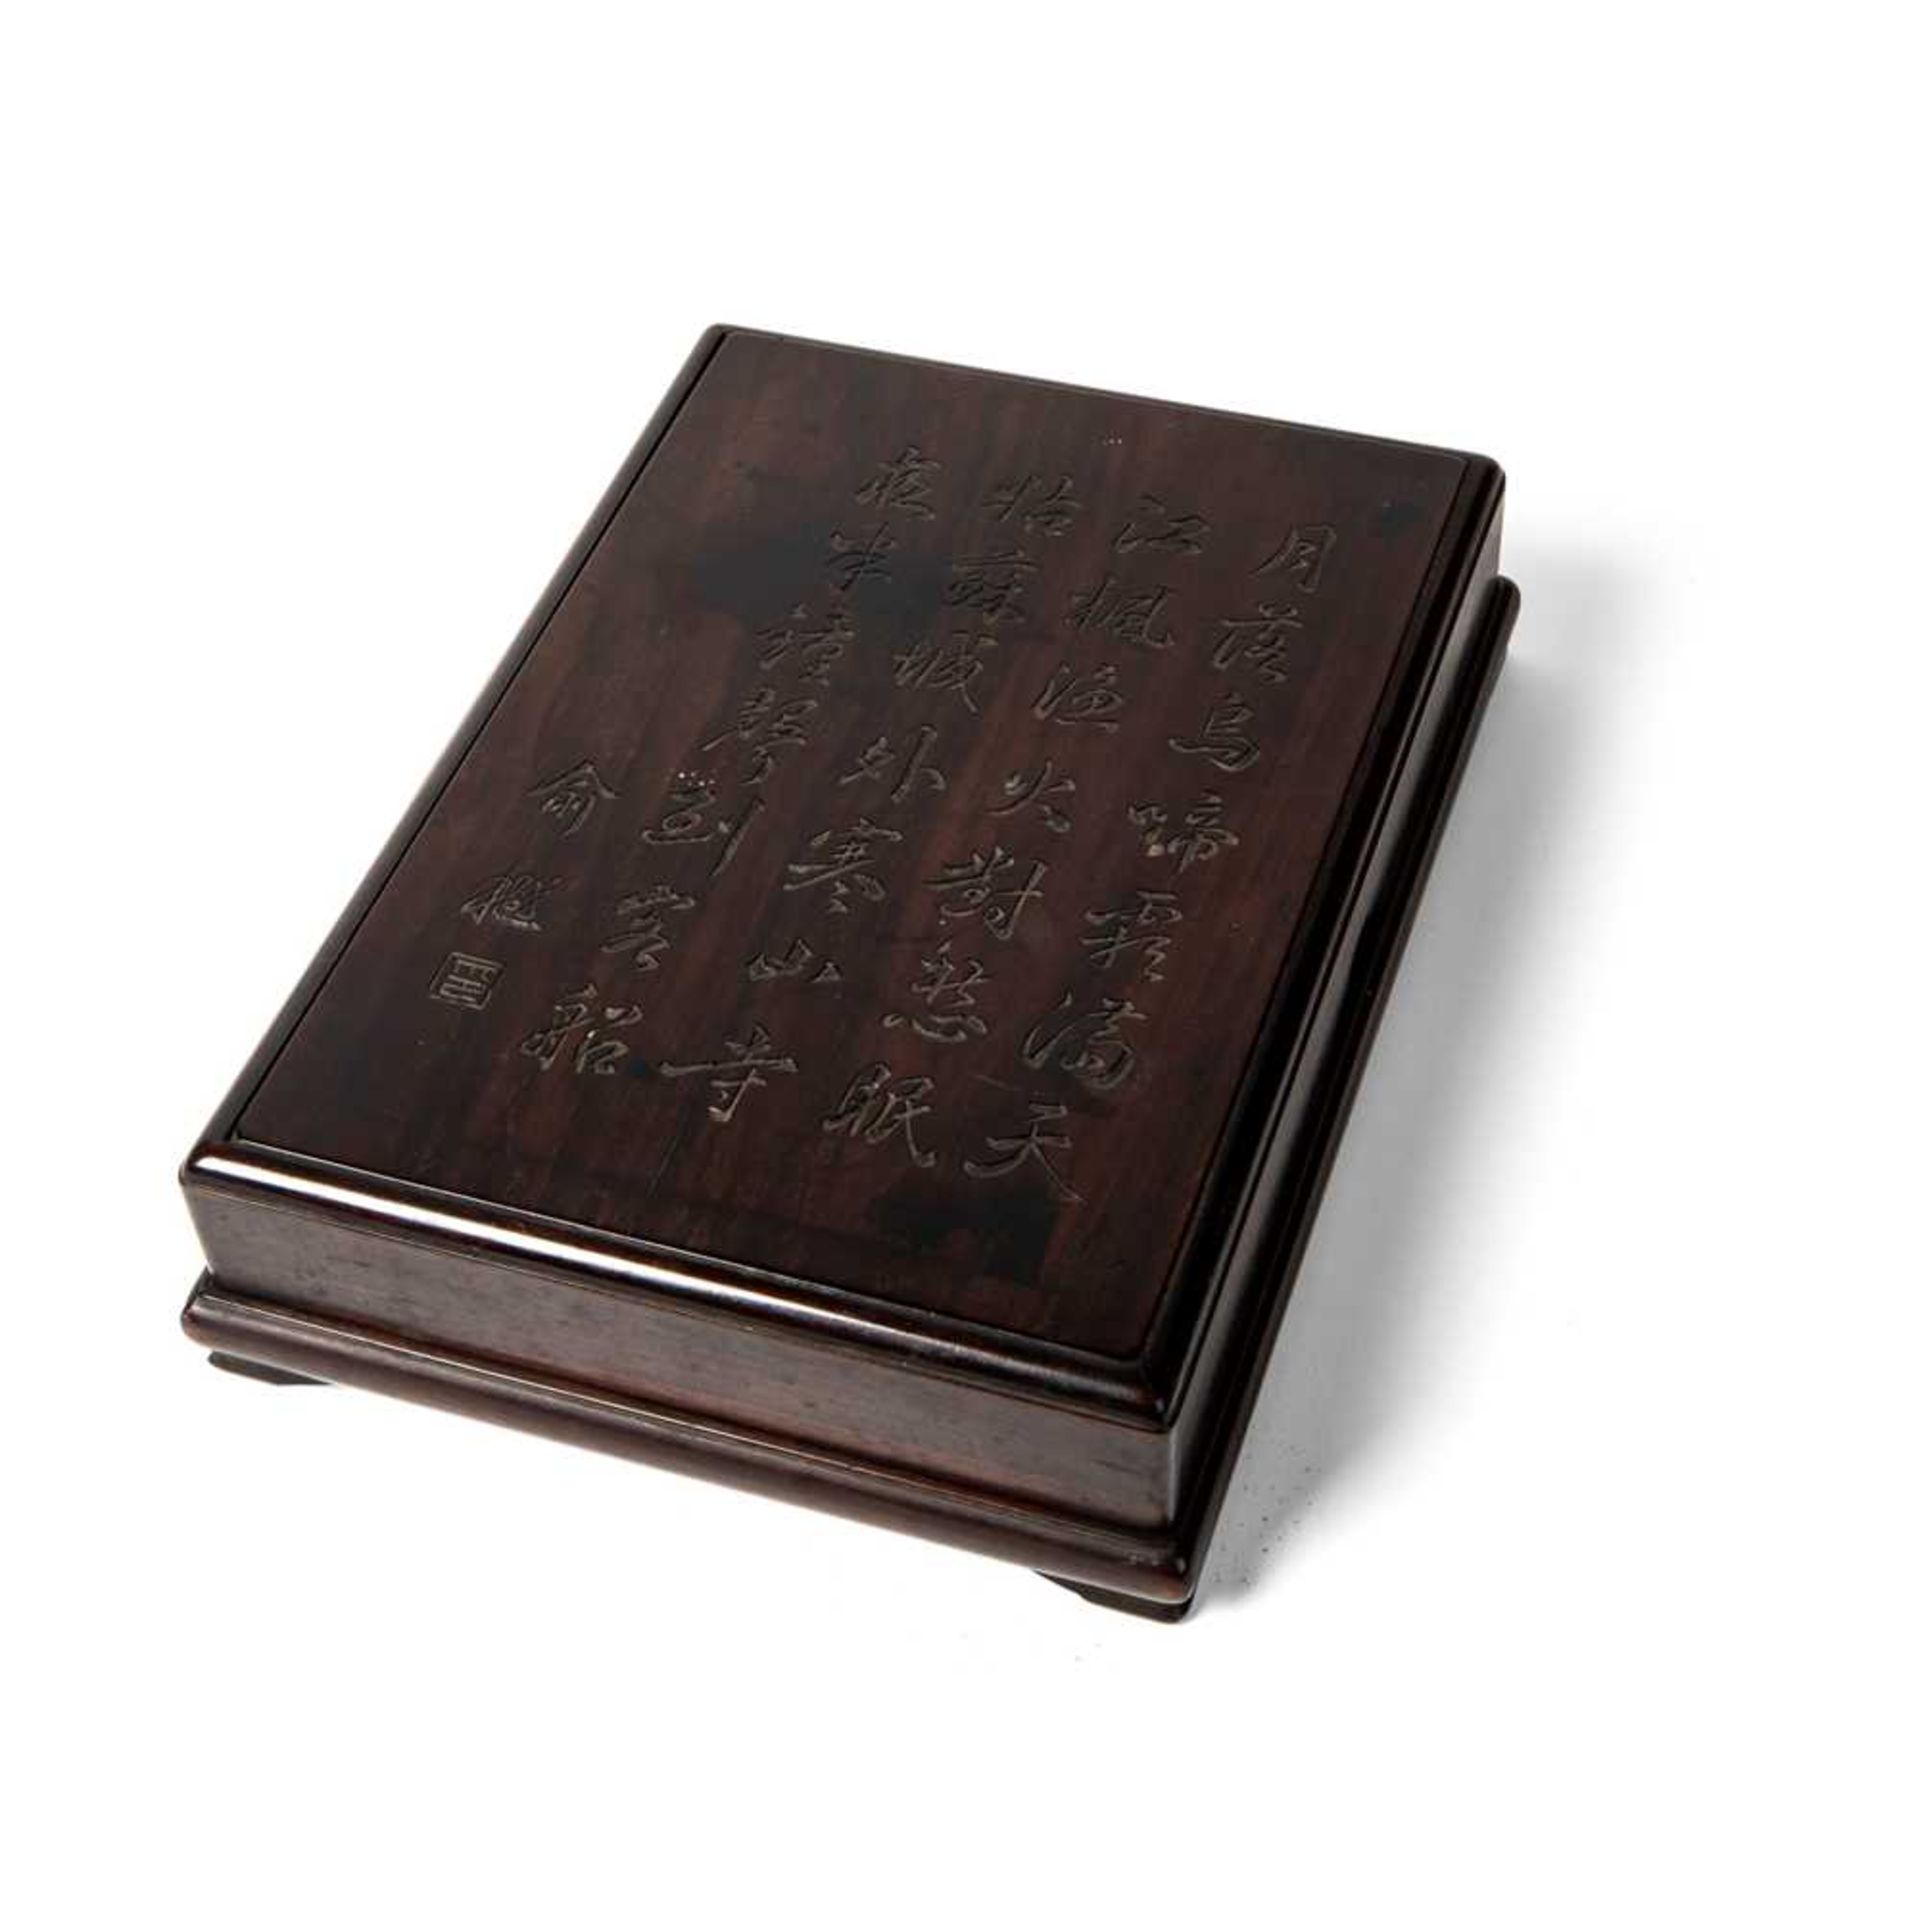 SUANZHIMU RECTANGULAR BOX WITH COVER QING DYNASTY, 19TH CENTURY - Image 22 of 22